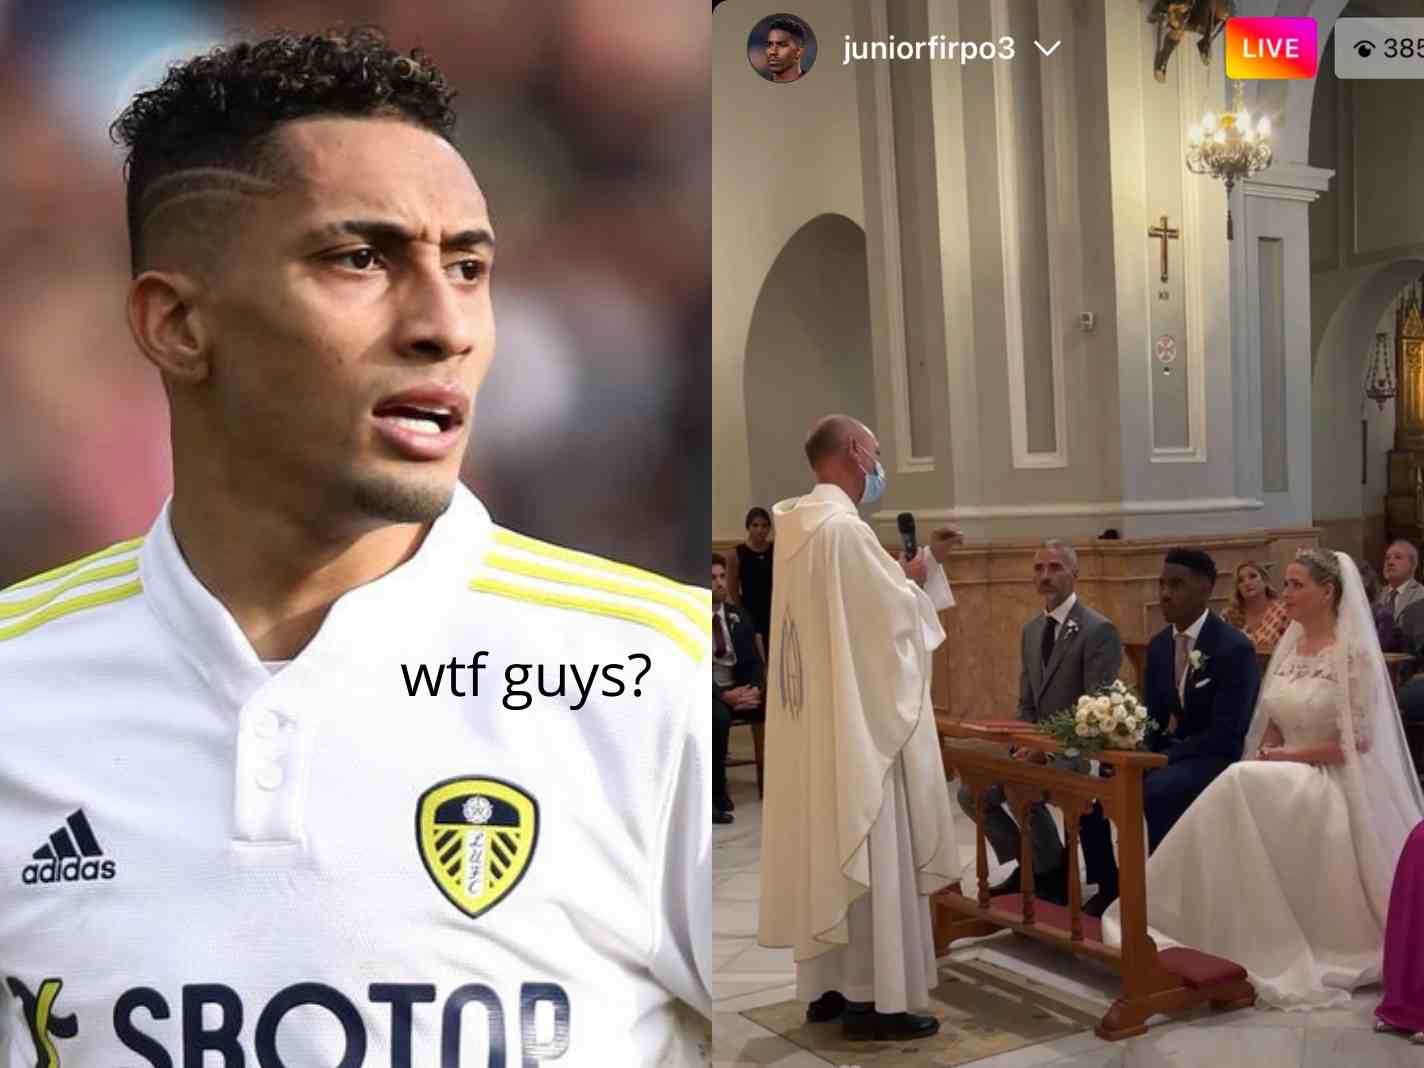 Junior Firpo live-streamed his wedding and comments were full of LUFC fans begging Raphinha to stay